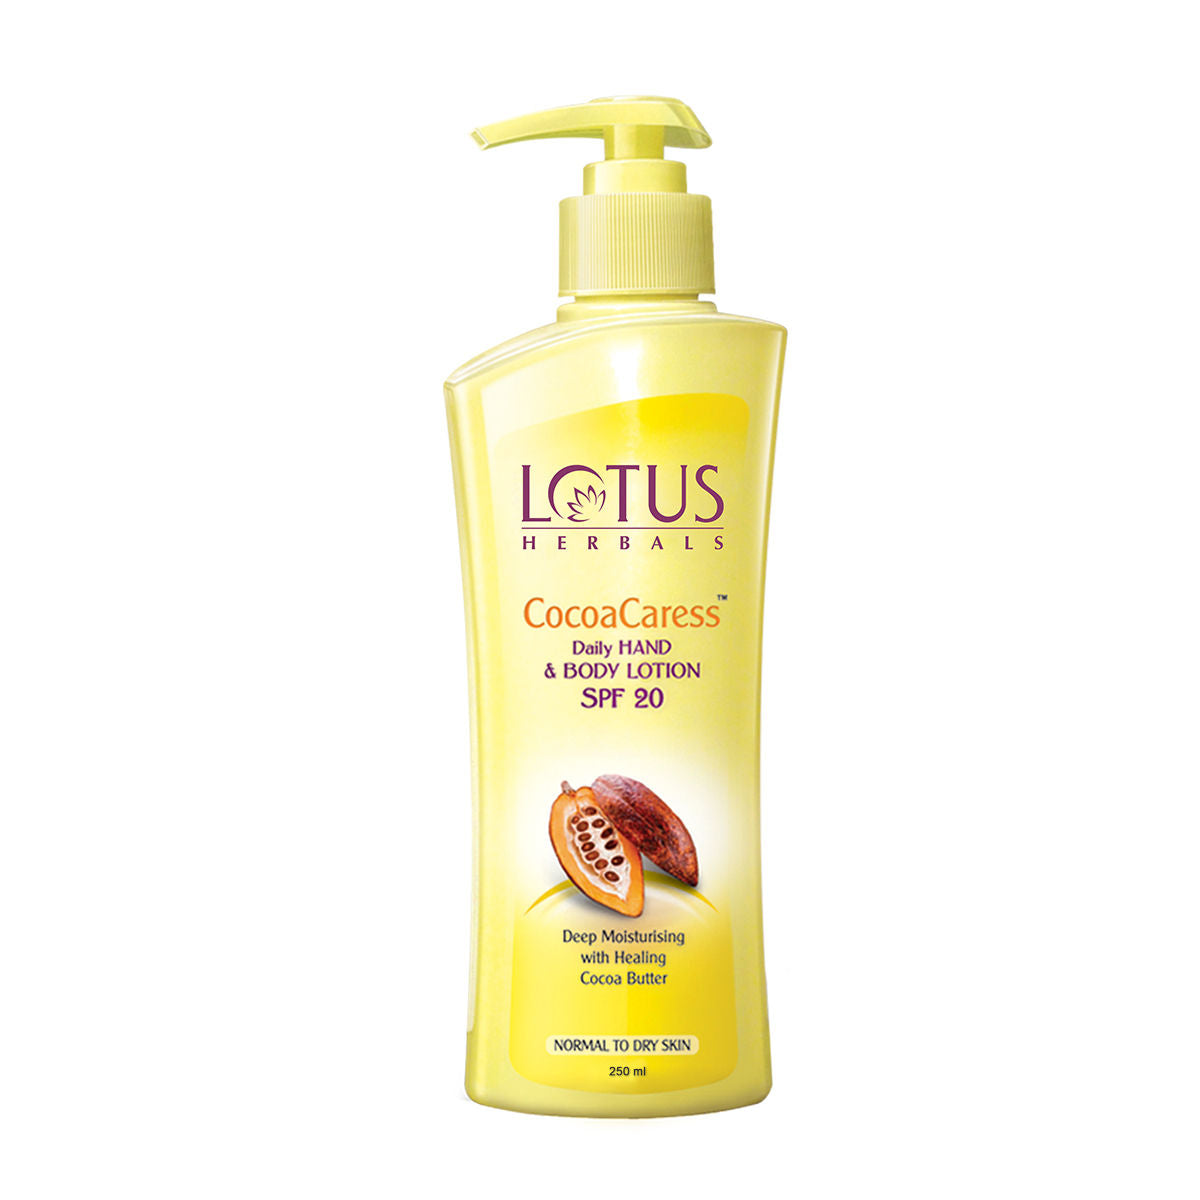 Lotus Herbals Cocoa Caress Daily Hand & Body Lotion SPF 20 (250 ml) Lotus Herbals